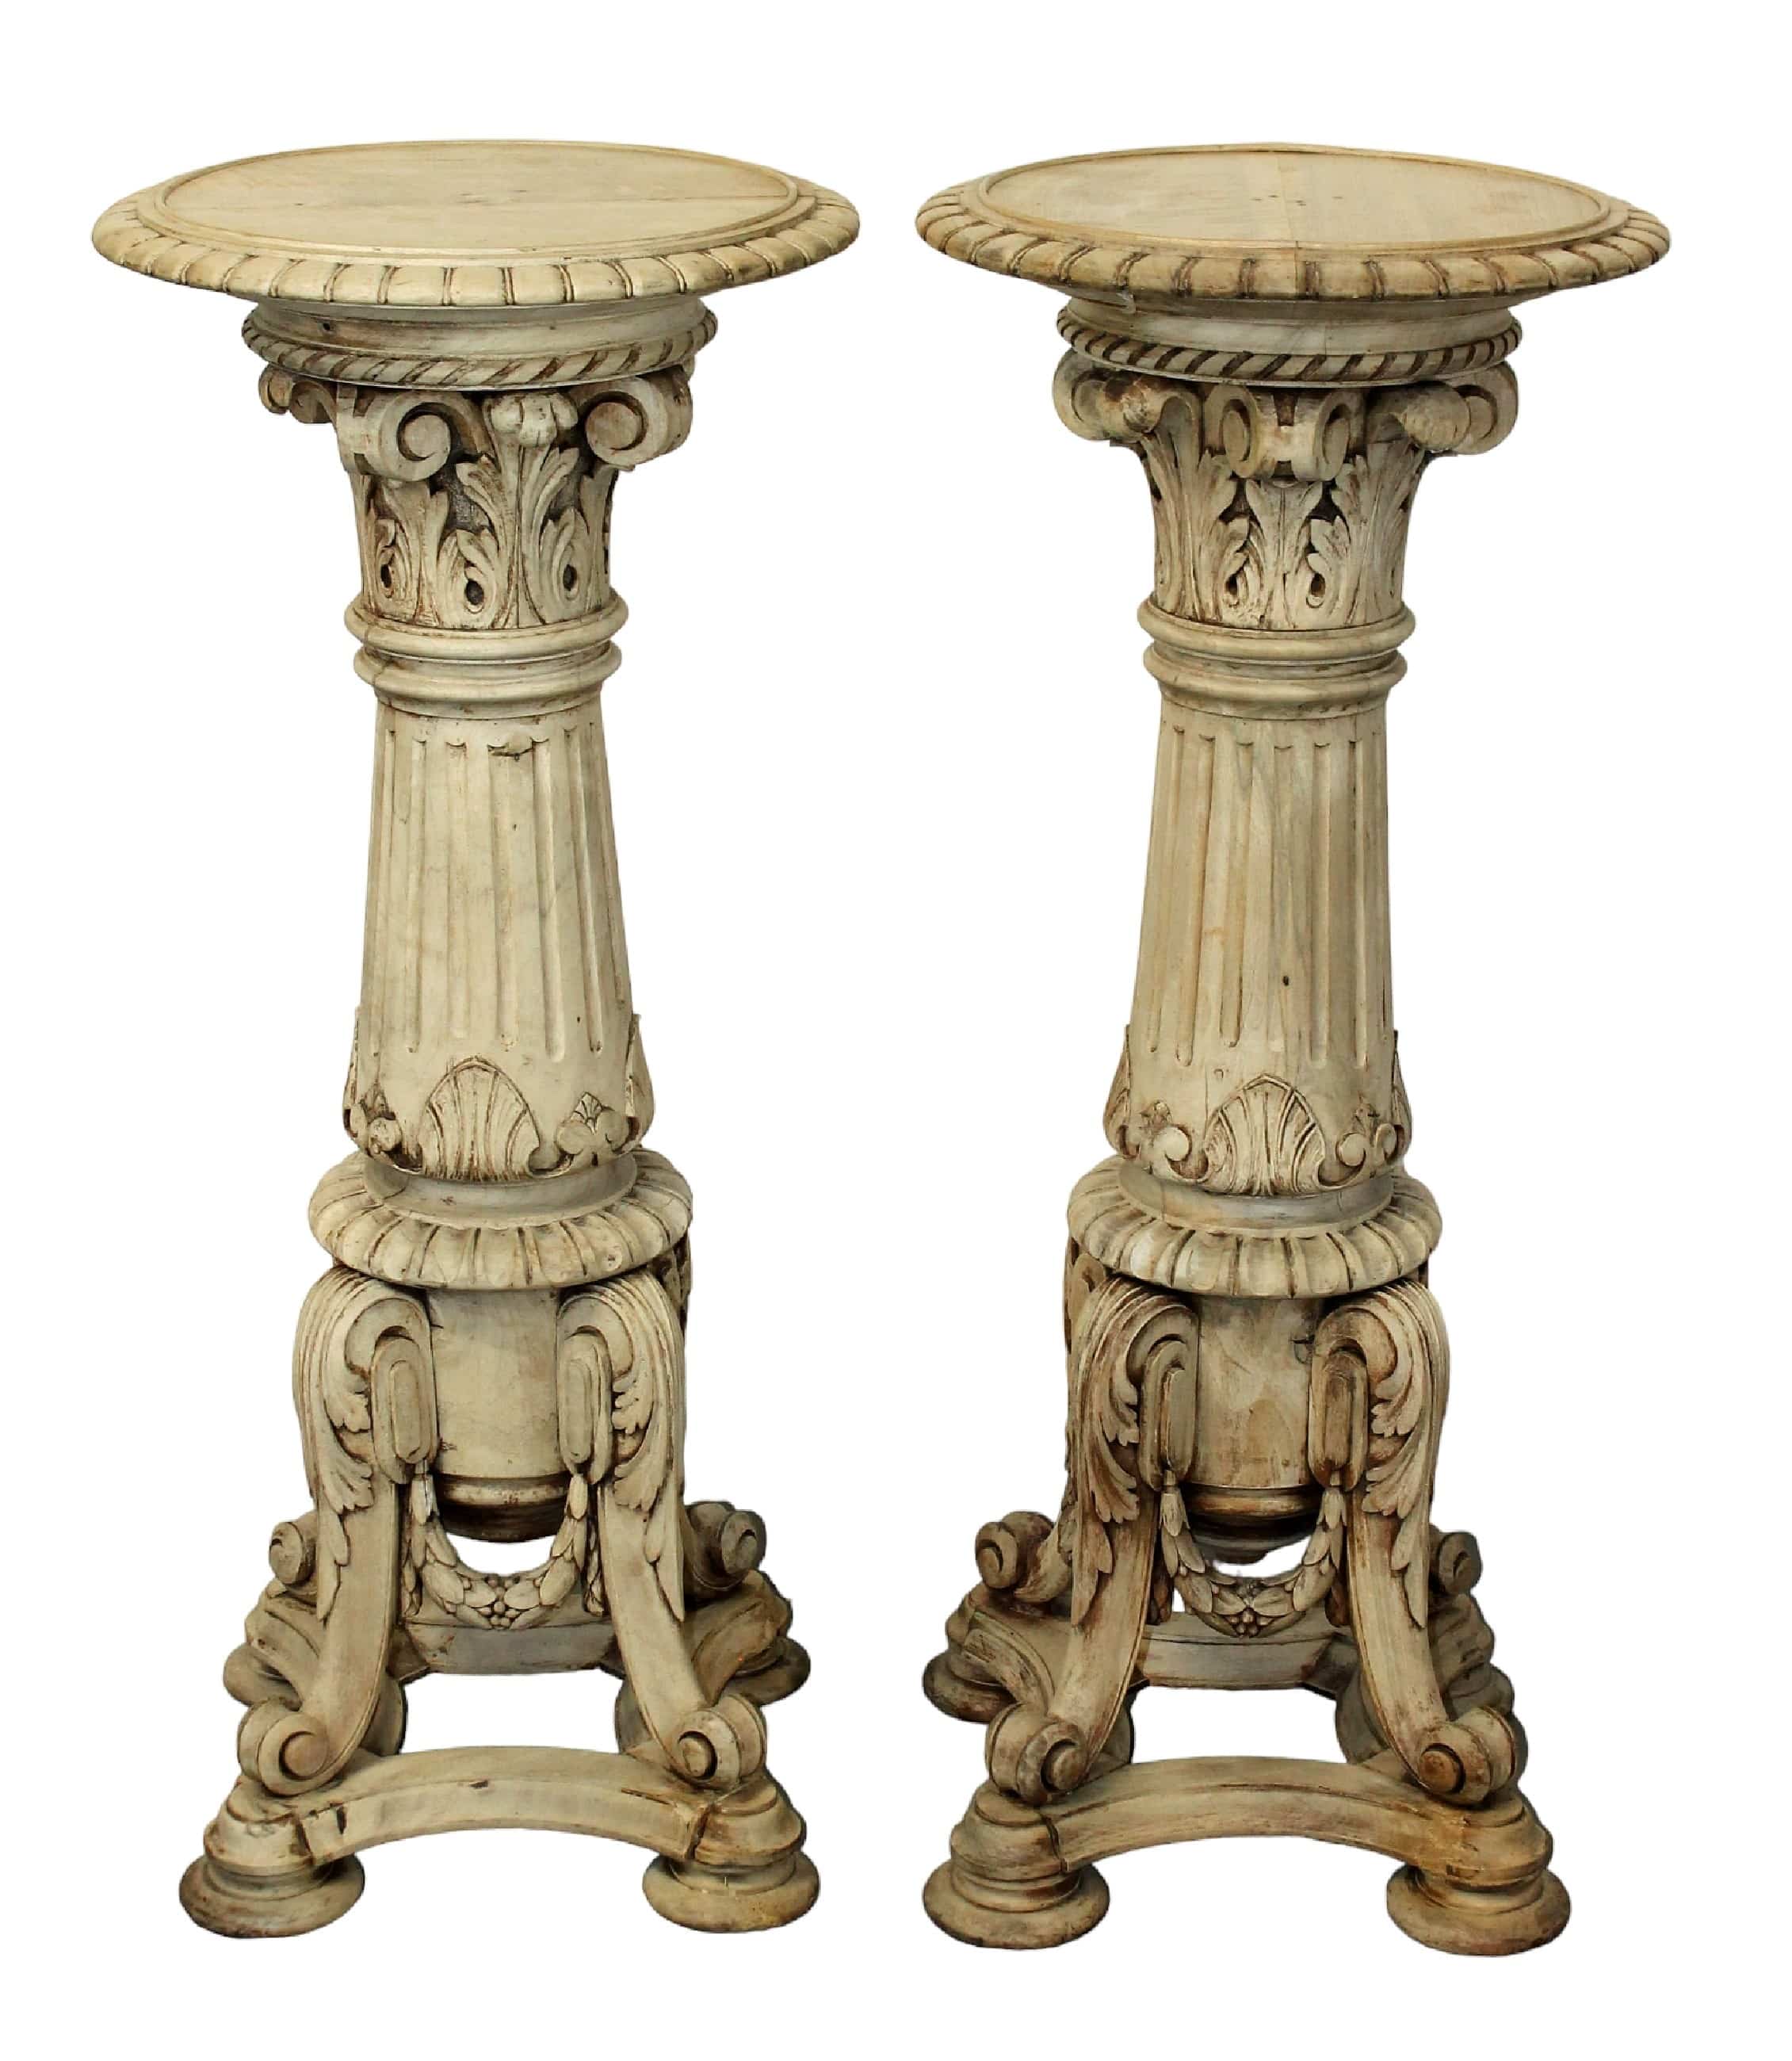 Pair of French neoclassical pedestals in bleached walnut
